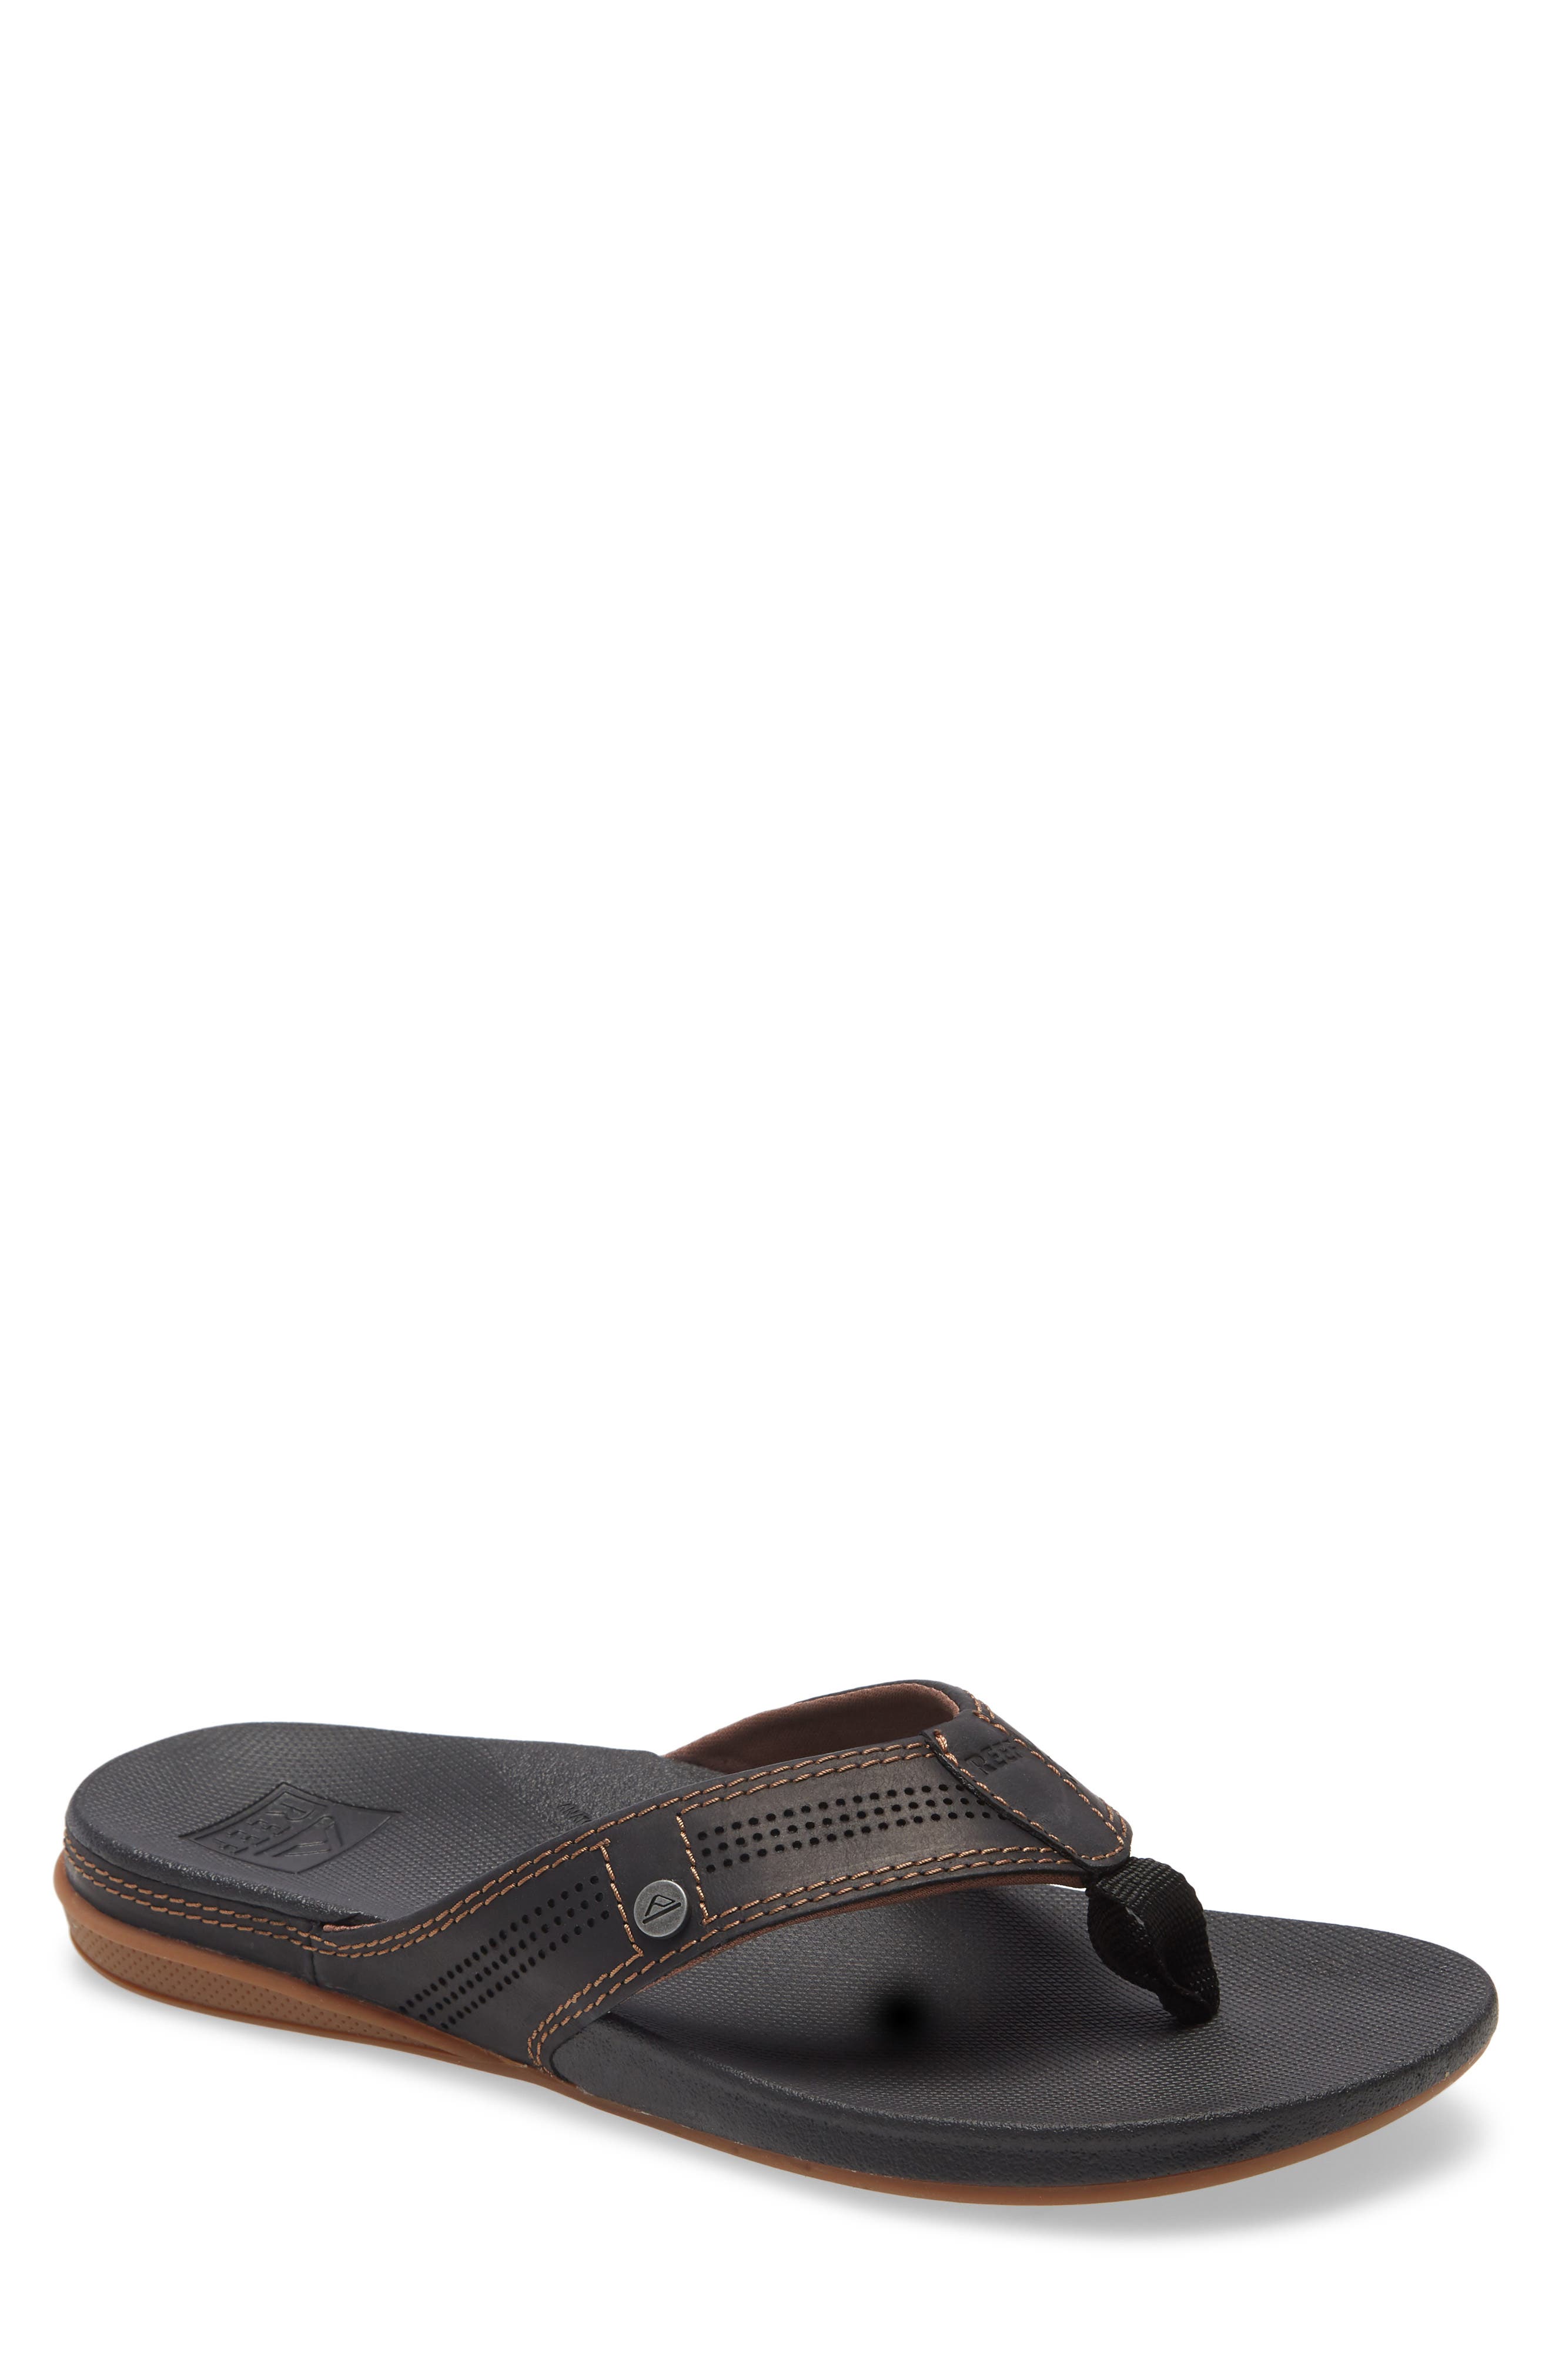 mens leather slippers nordstrom